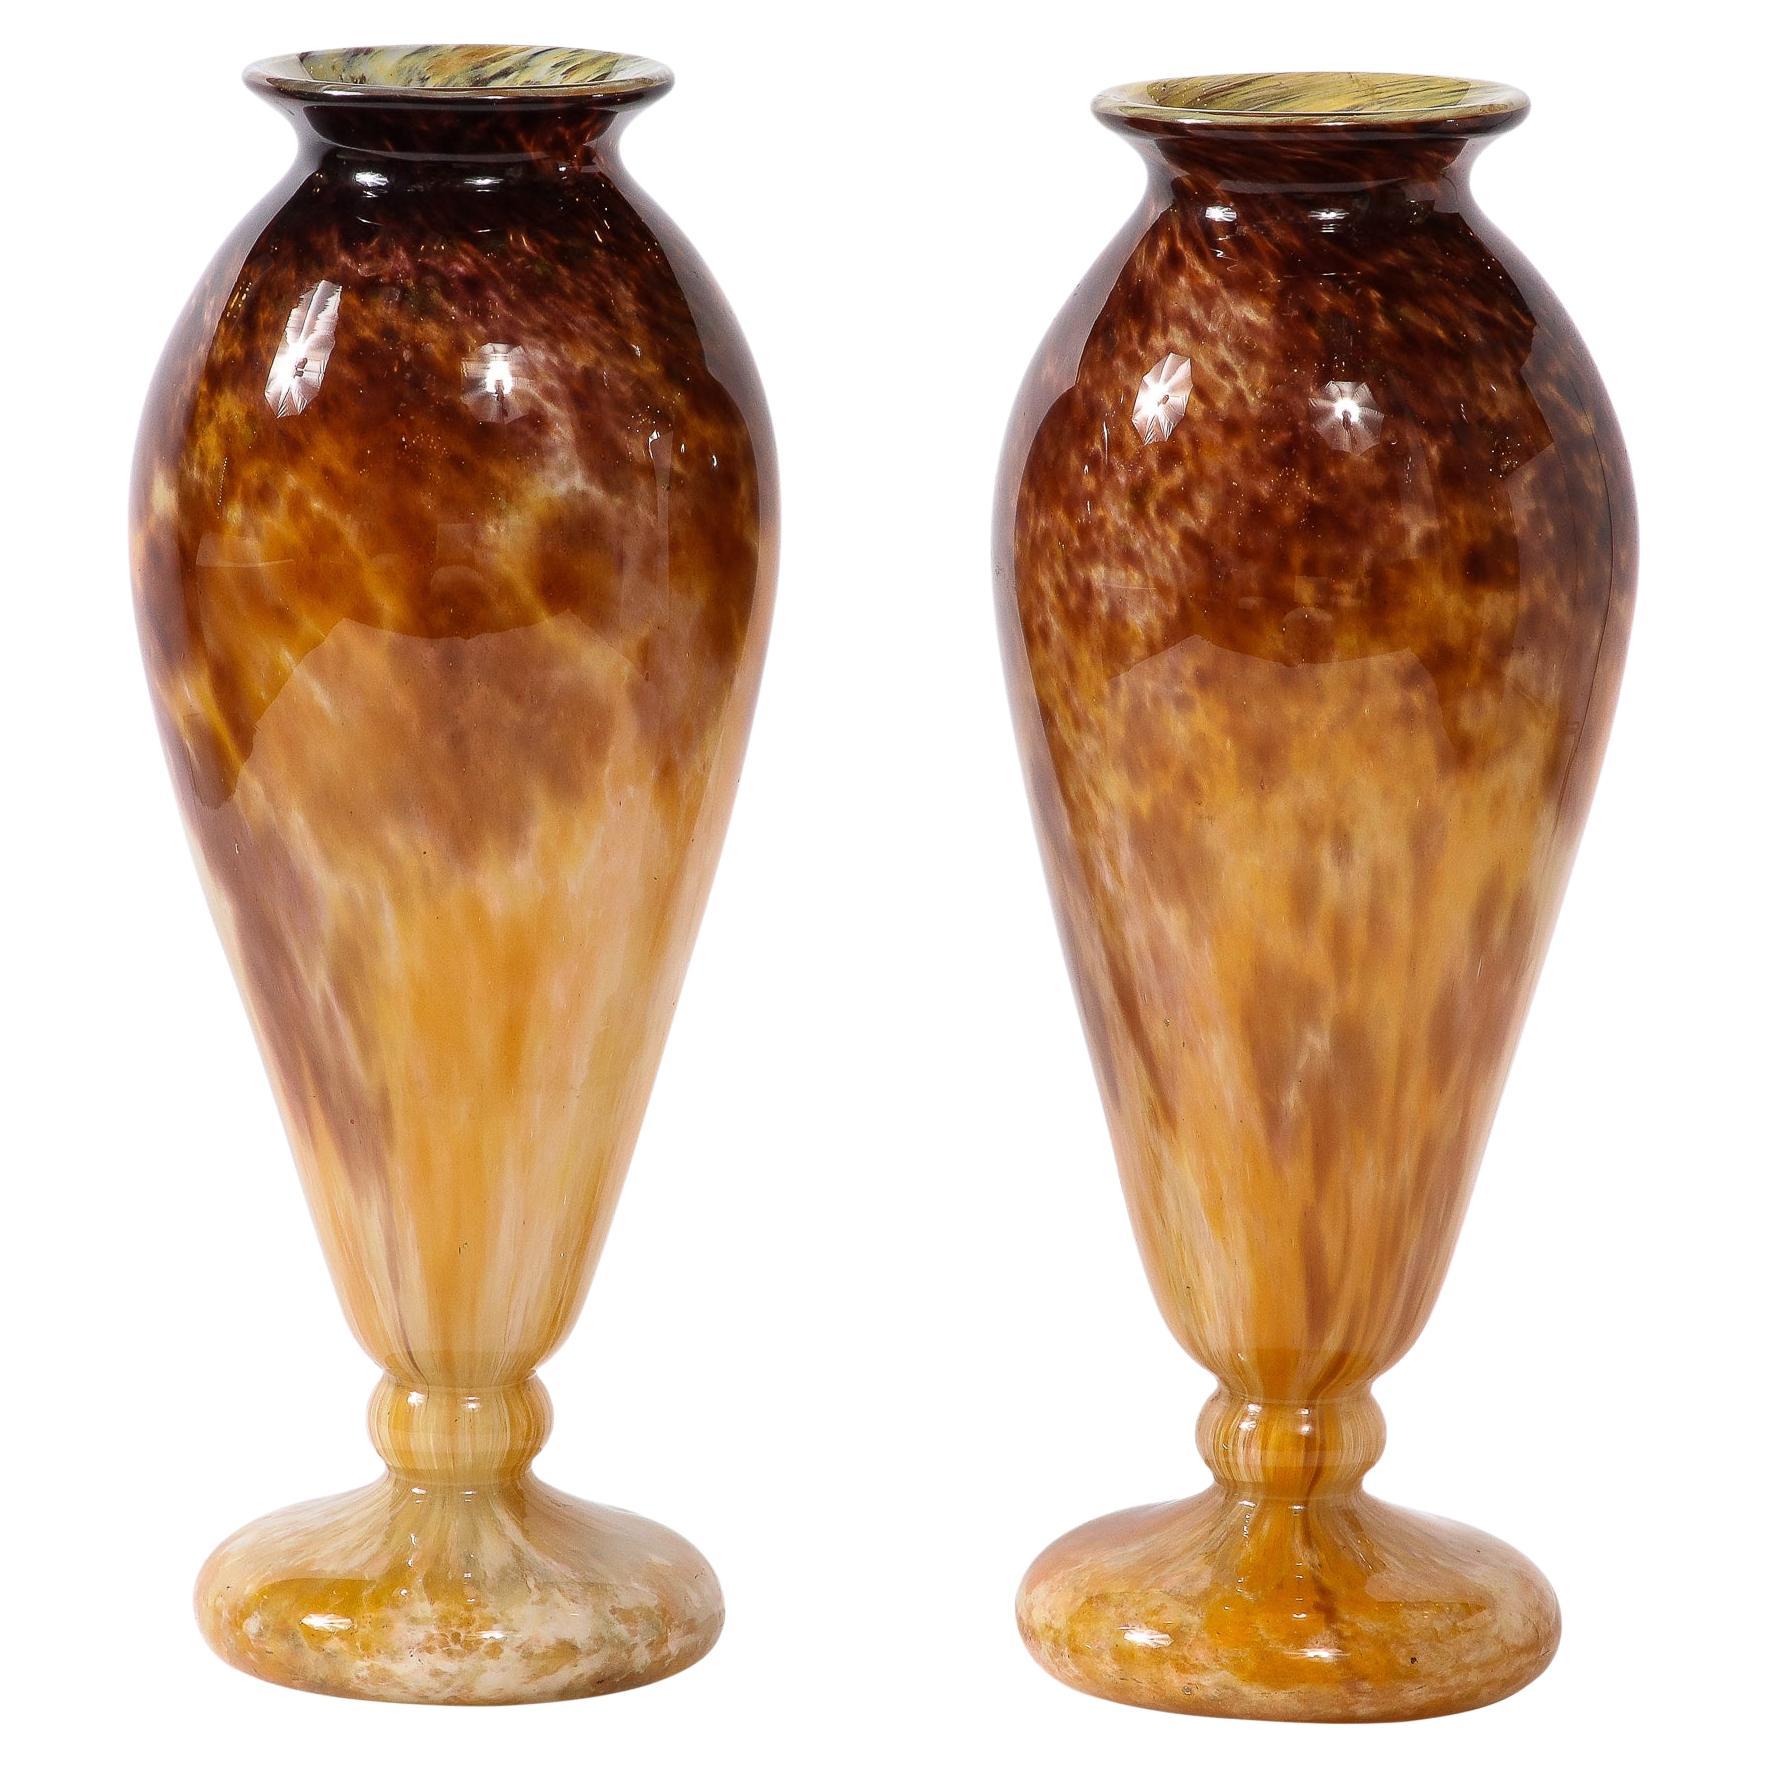 Pair of Art Deco Vases in Smoked Amethyst & Amber Hued Glass by Schneider